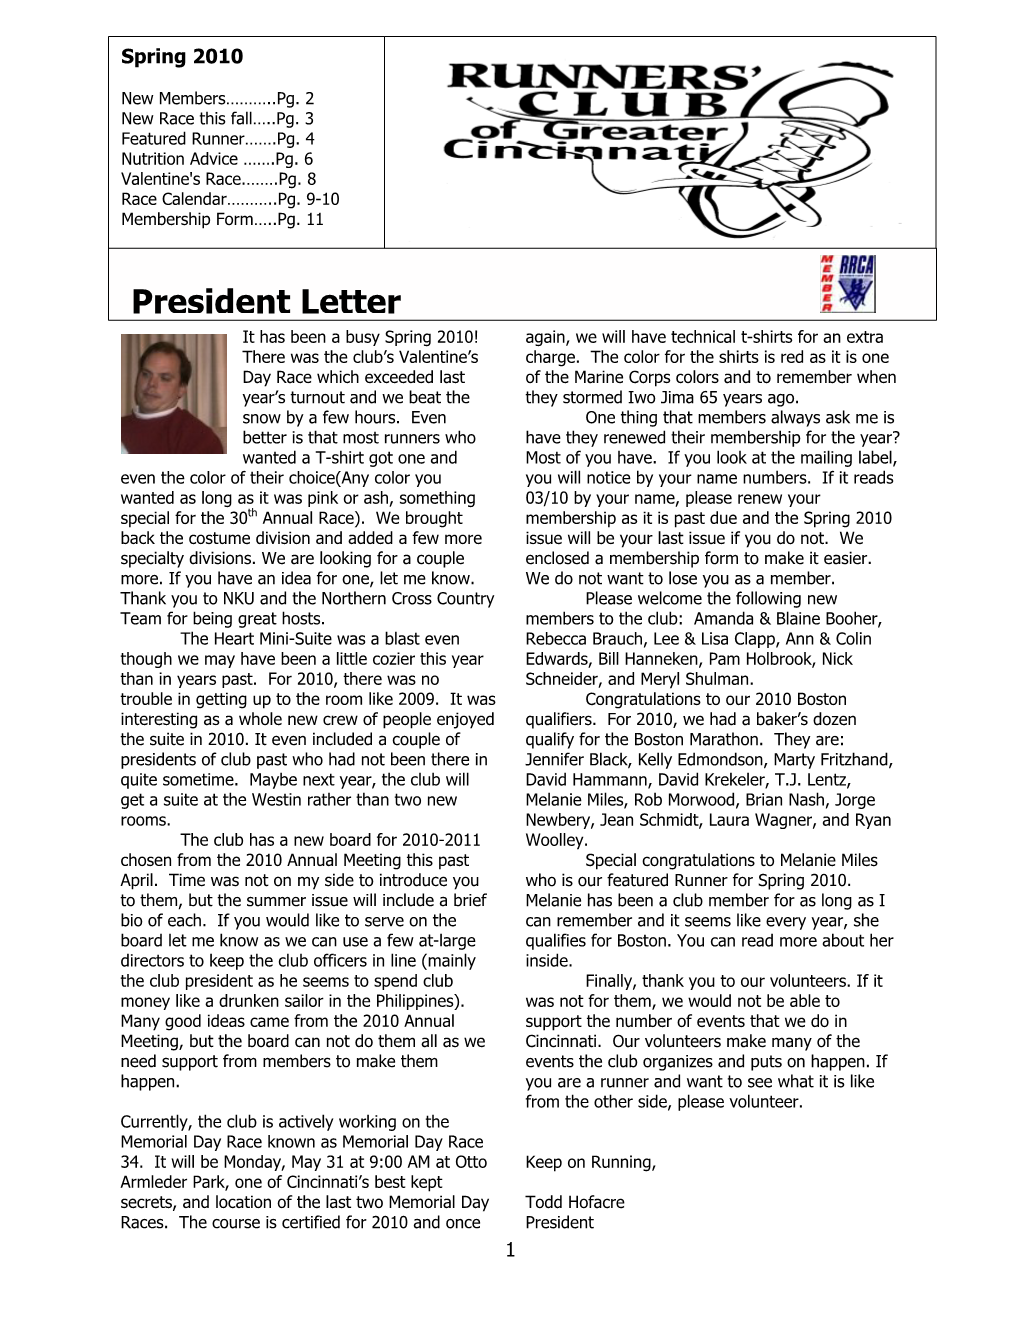 President Letter It Has Been a Busy Spring 2010! Again, We Will Have Technical T-Shirts for an Extra There Was the Club’S Valentine’S Charge